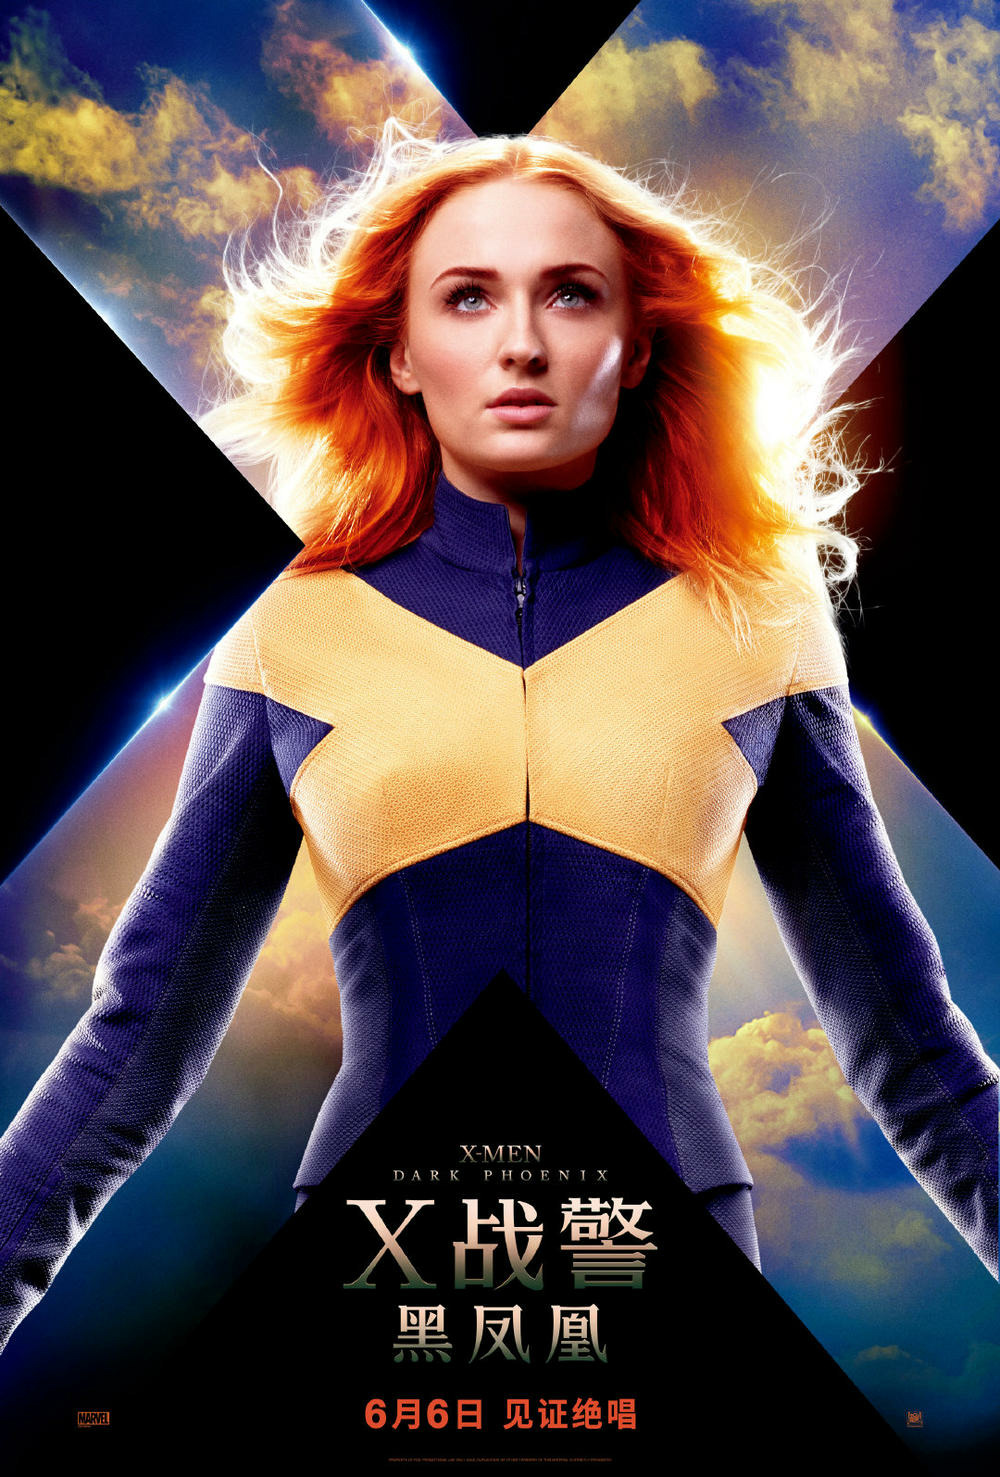 Extra Large Movie Poster Image for Dark Phoenix (#16 of 32)